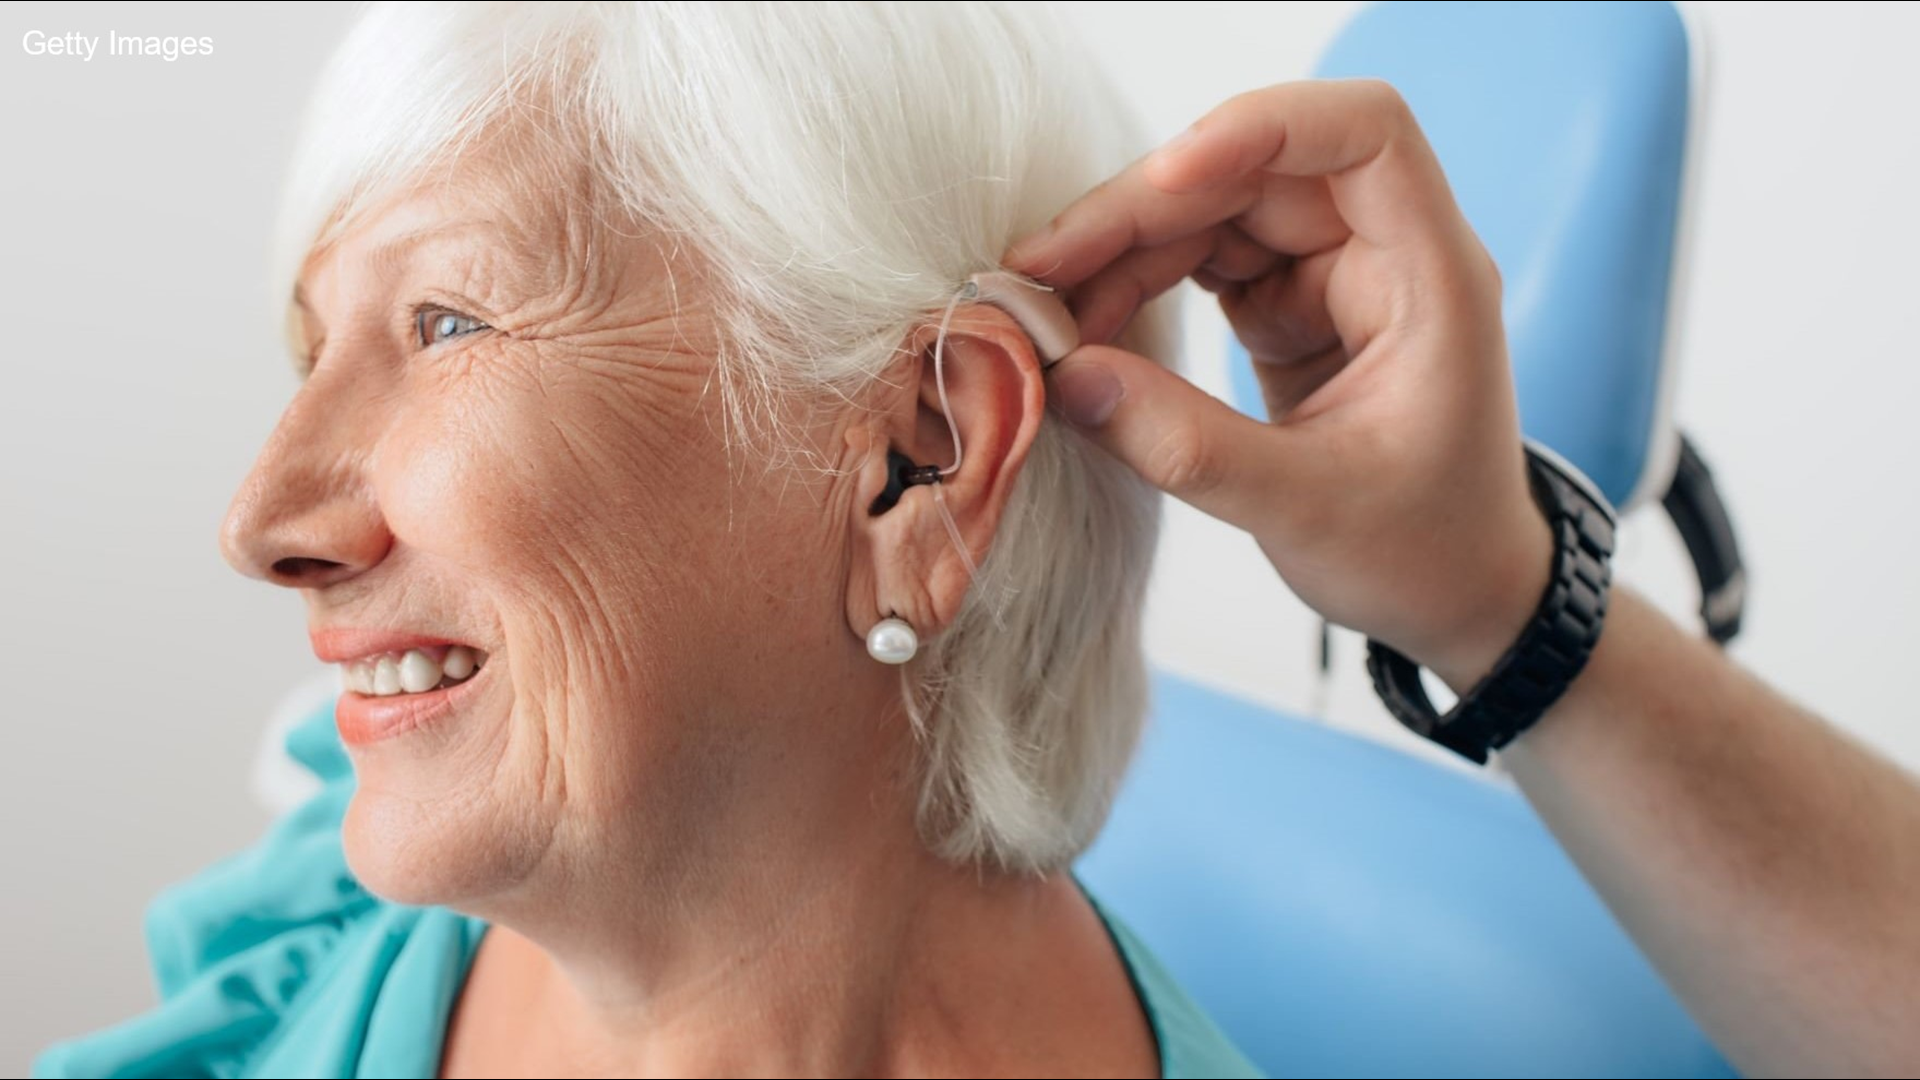 Smaller and lighter with vastly improved sound quality, we take a peek at the latest hearing-assistance tech. Sponsored by Premera Blue Cross